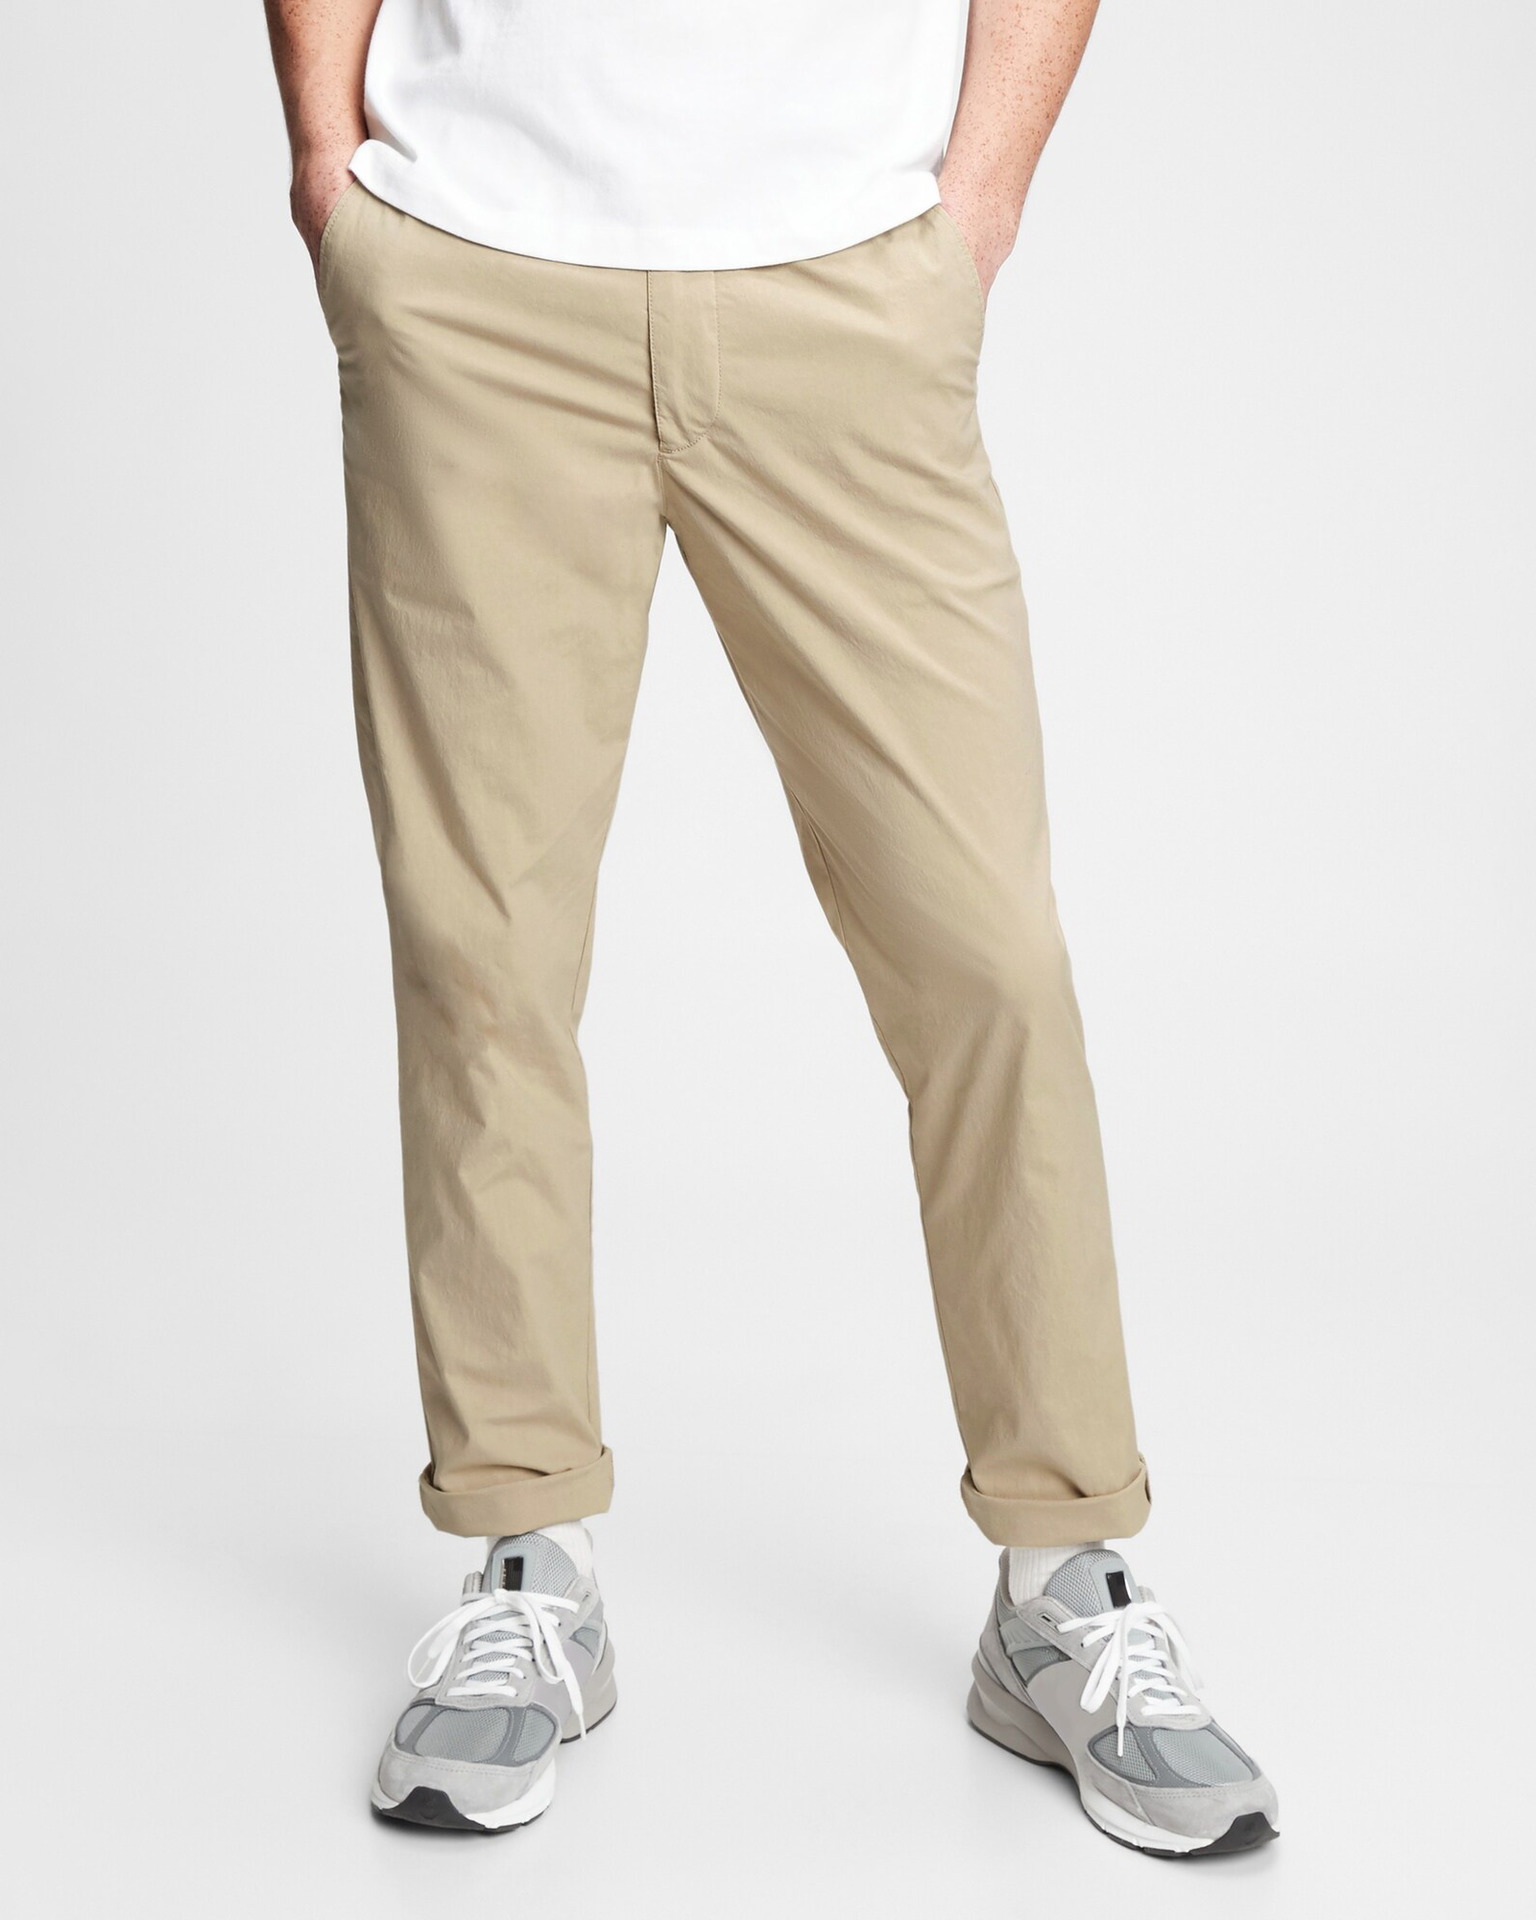 Buy Cream Gap Twill Cotton Mens Cargo Pants Online At Best Prices   Tistabene